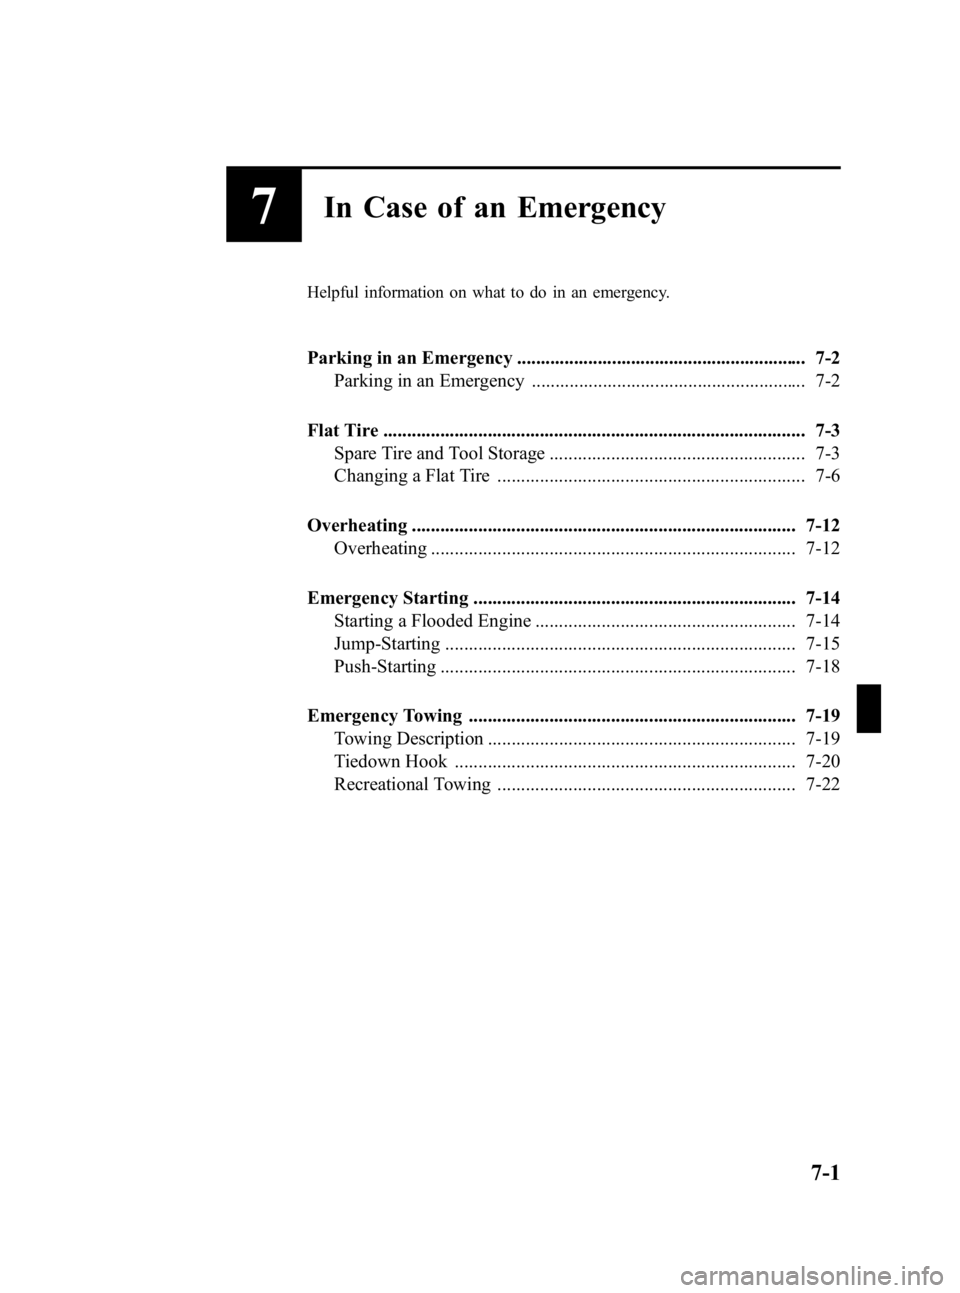 MAZDA MODEL 3 5-DOOR 2006  Owners Manual Black plate (227,1)
7In Case of an Emergency
Helpful information on what to do in an emergency.
Parking in an Emergency ............................................................. 7-2Parking in an E